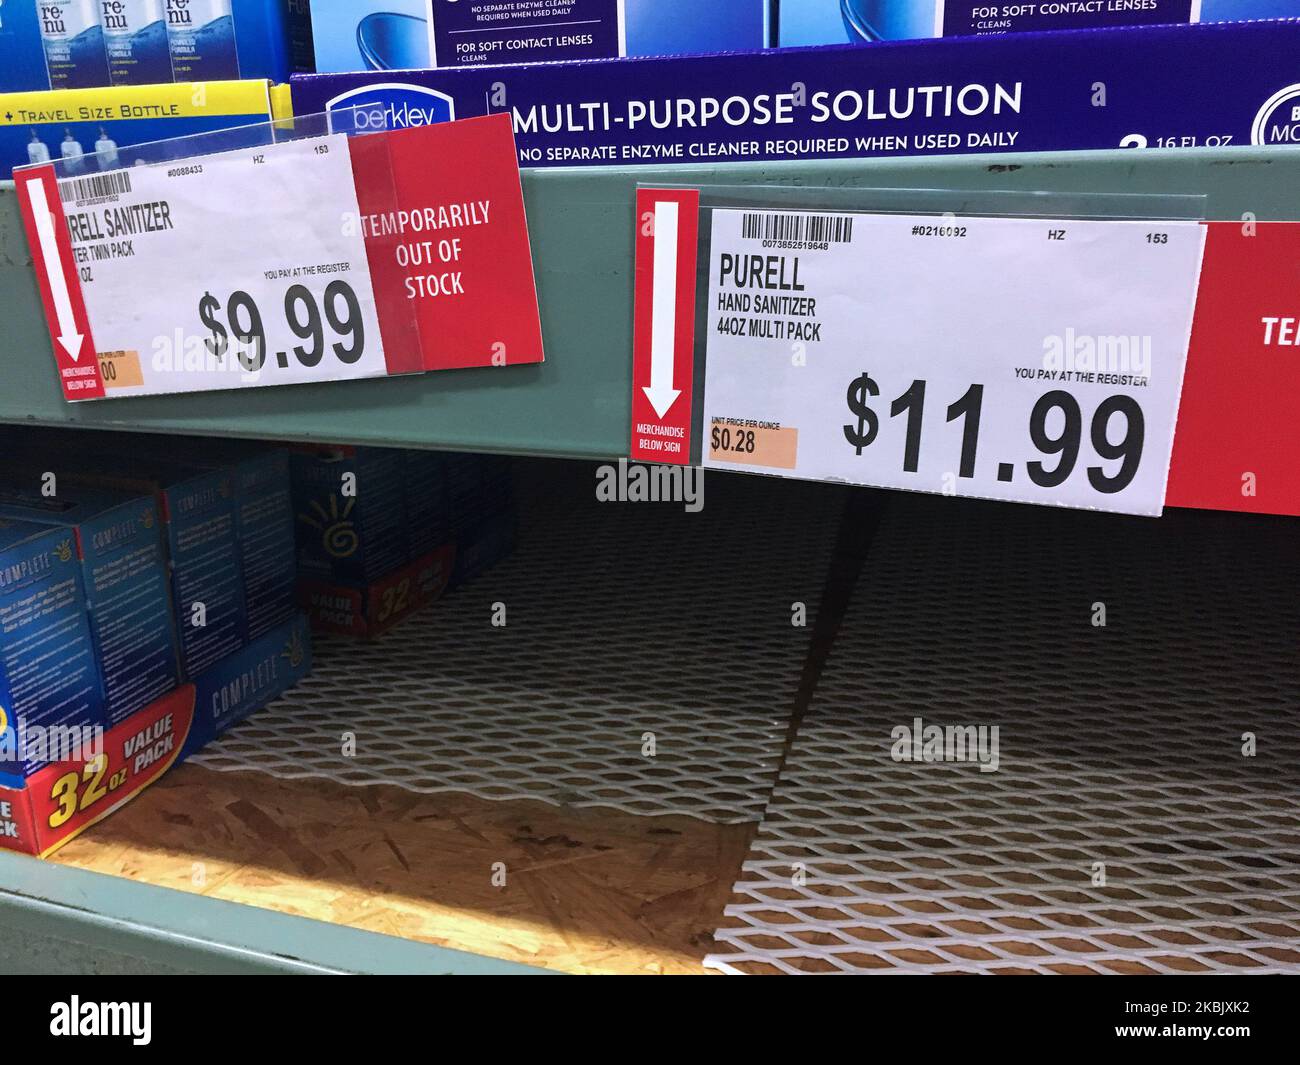 Empty shelves are seen at a BJ's Wholesale Club store on March 12, 2020 in Orlando, Florida as people stock up on hand sanitizer and other personal hygiene products due to the Covid-19 (coronavirus) outbreak. (Photo by Paul Hennessy/NurPhoto) Stock Photo